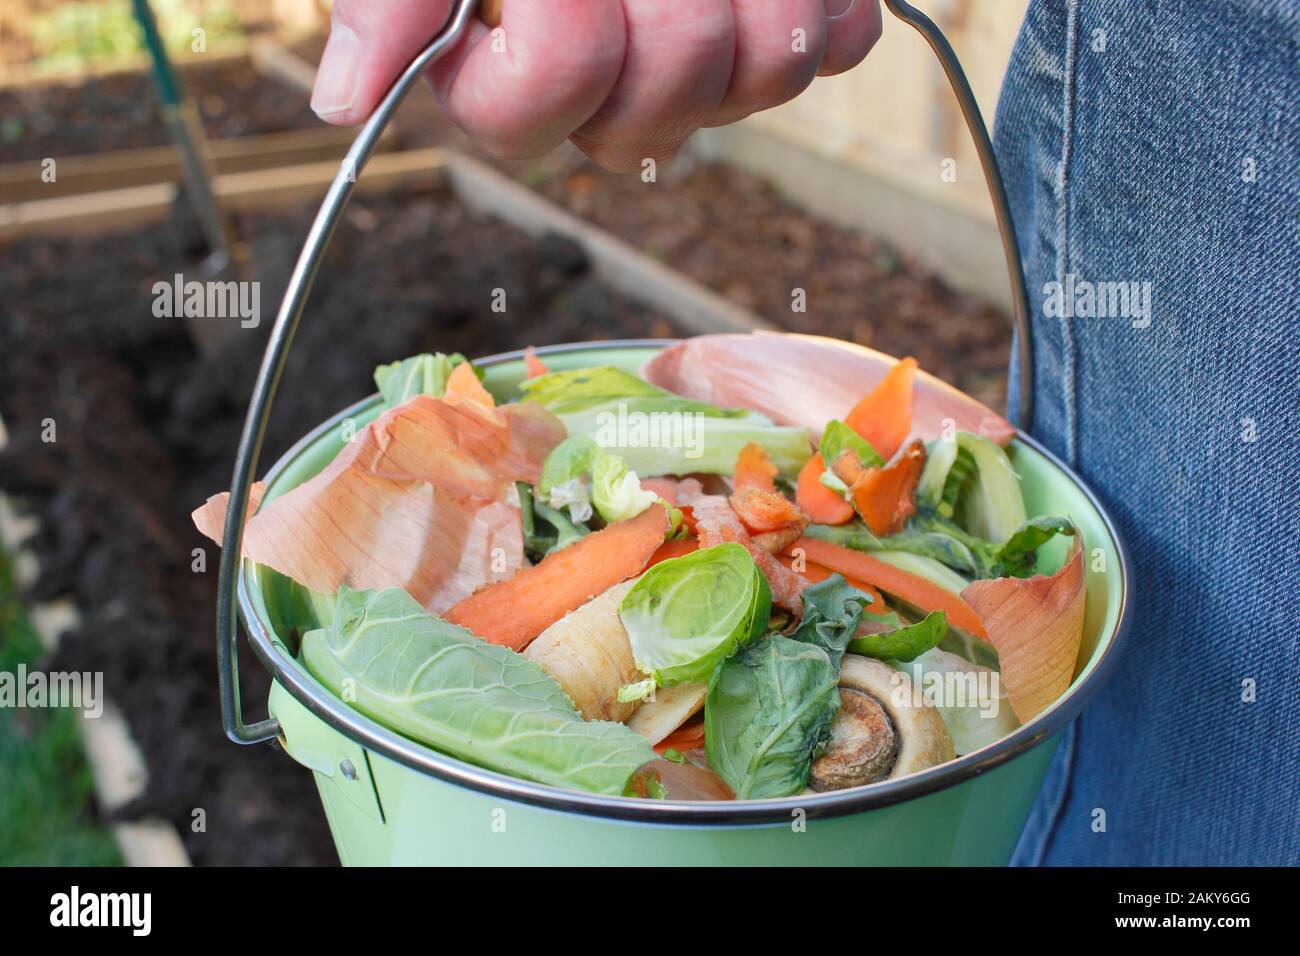 Food waste, such as vegetable and fruit peelings, taken into a home vegetable garden for making into compost. UK Stock Photo